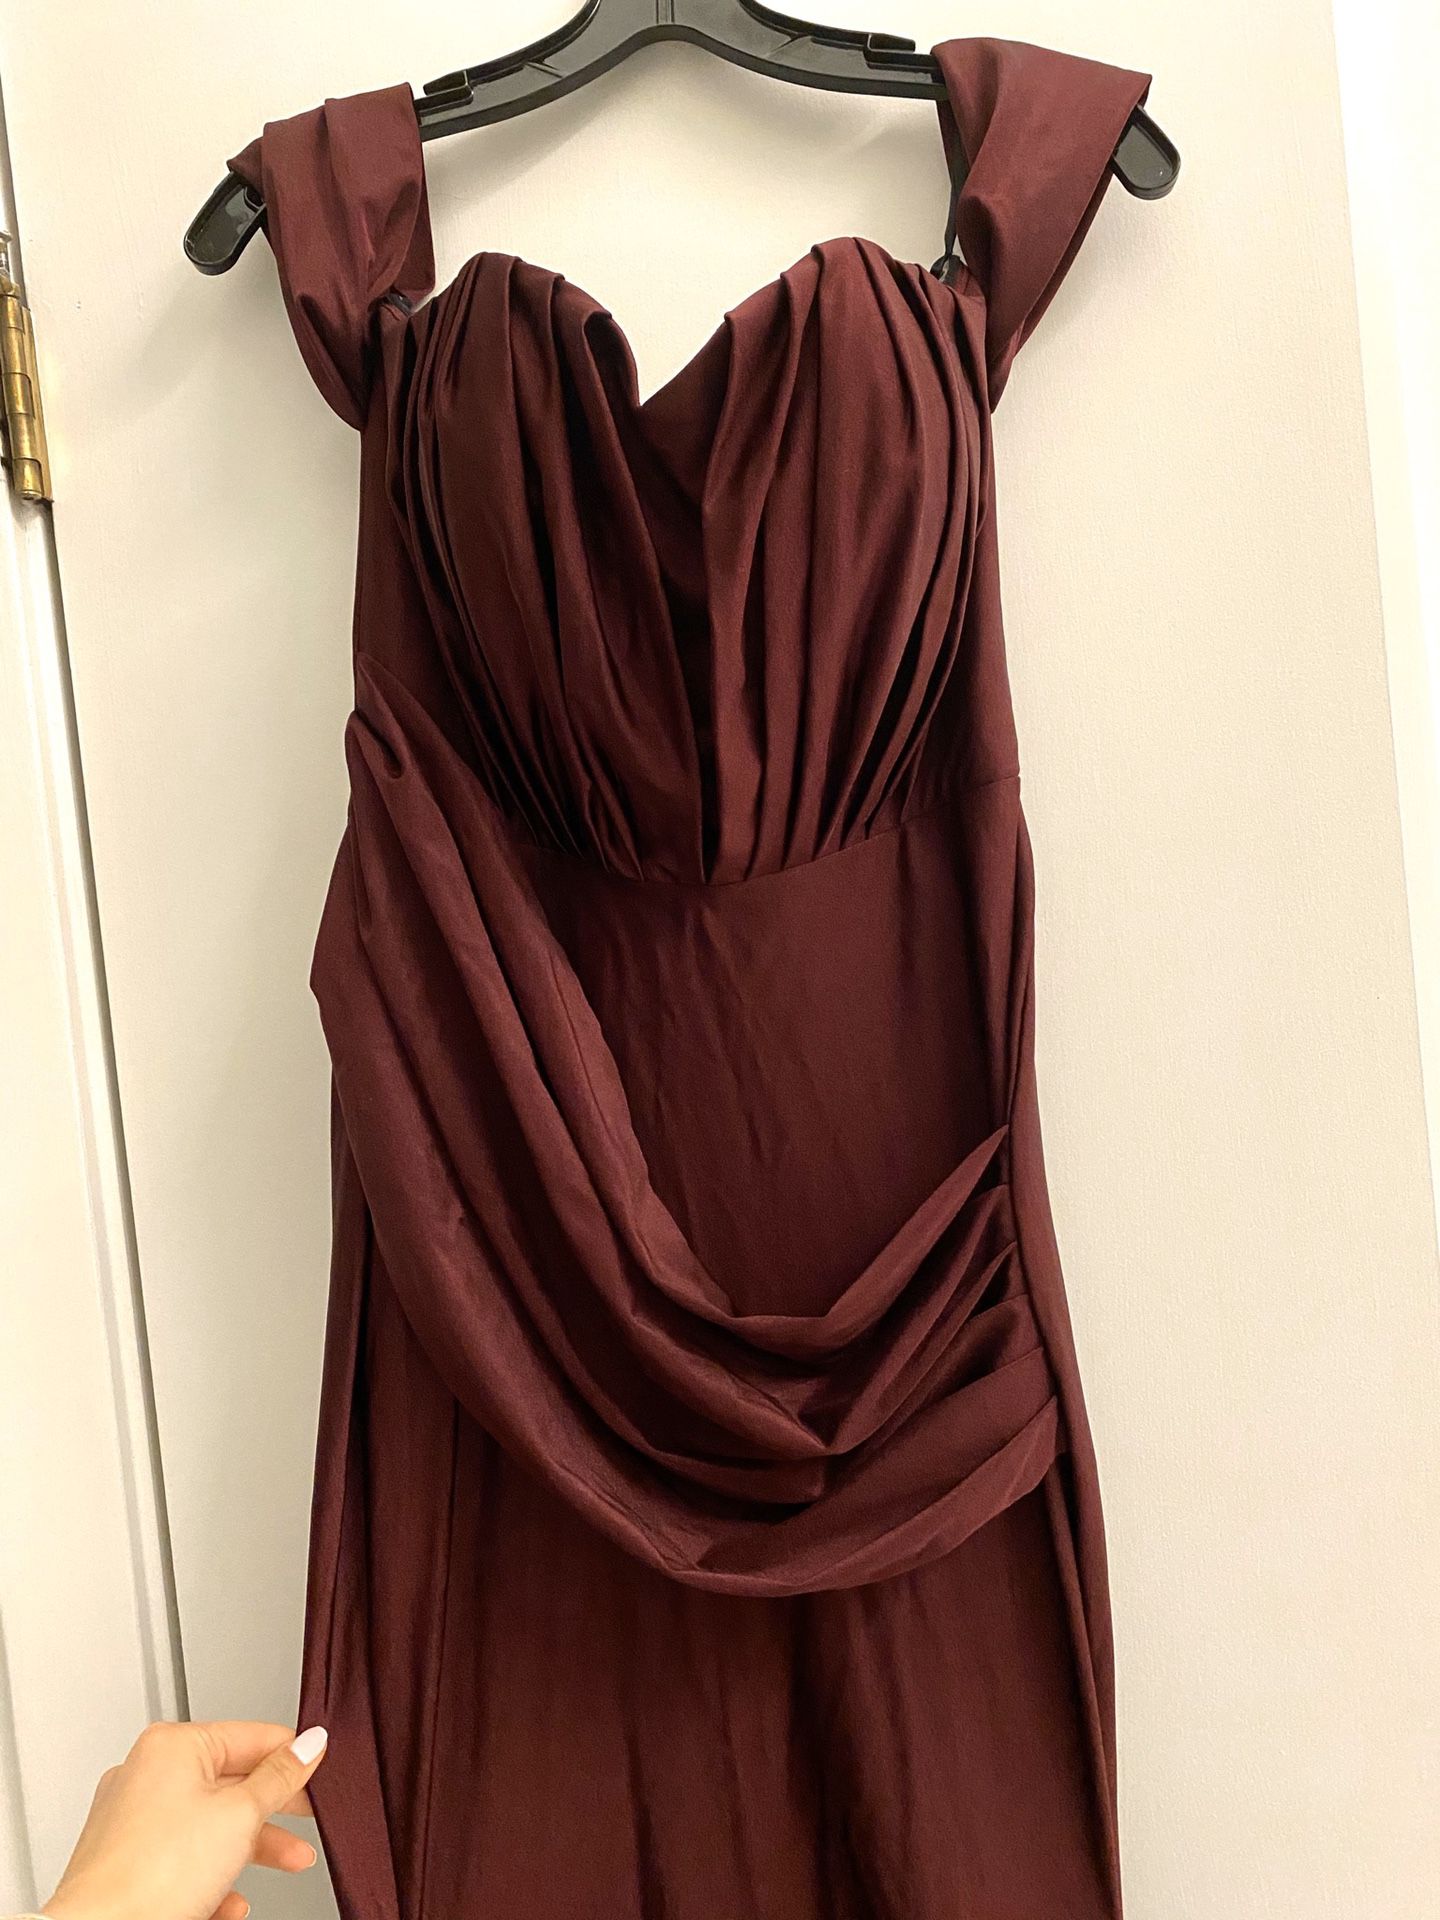 Jessica Angel Prom Formal Fitted Mermaid Long Satin/Jersey Maroon gown sz M